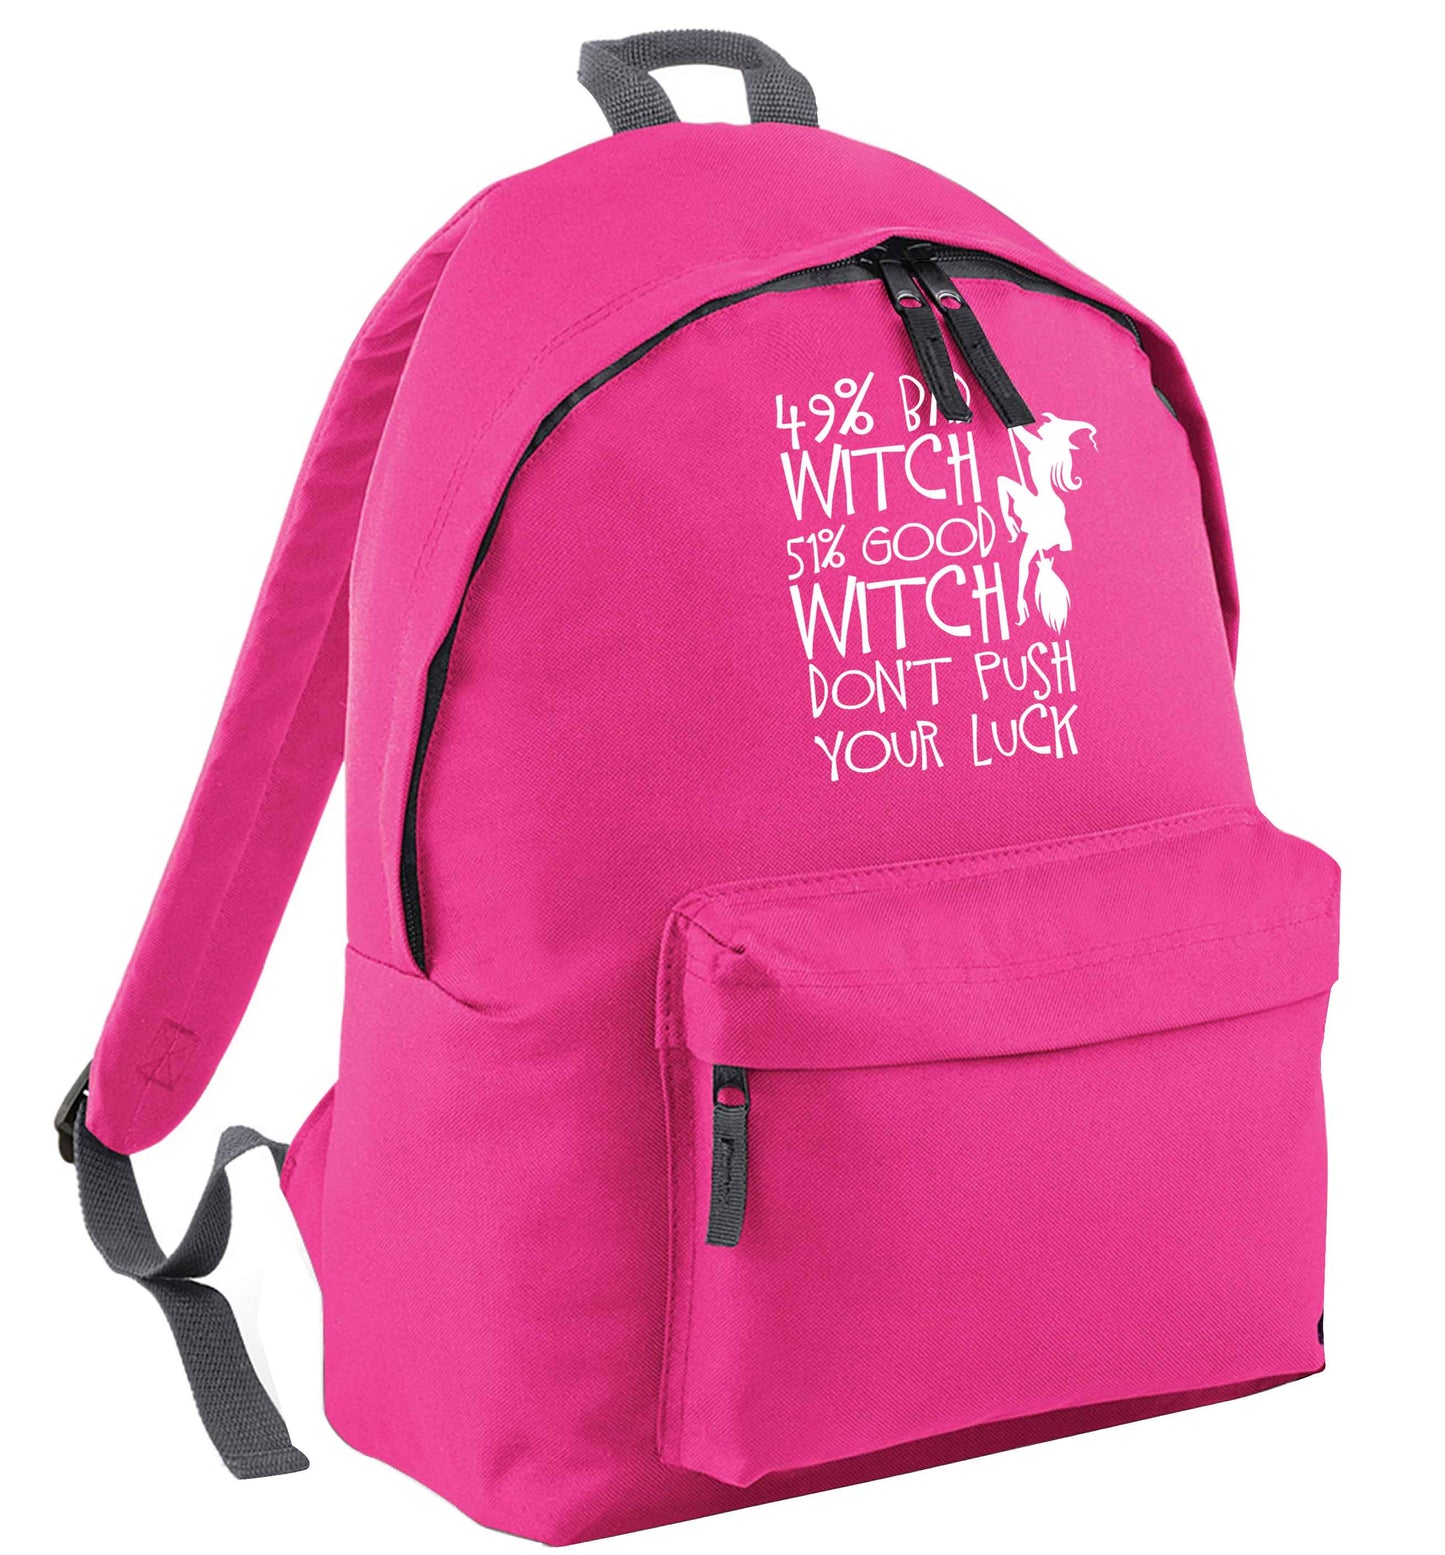 49% bad witch 51% good witch don't push your luck | Children's backpack